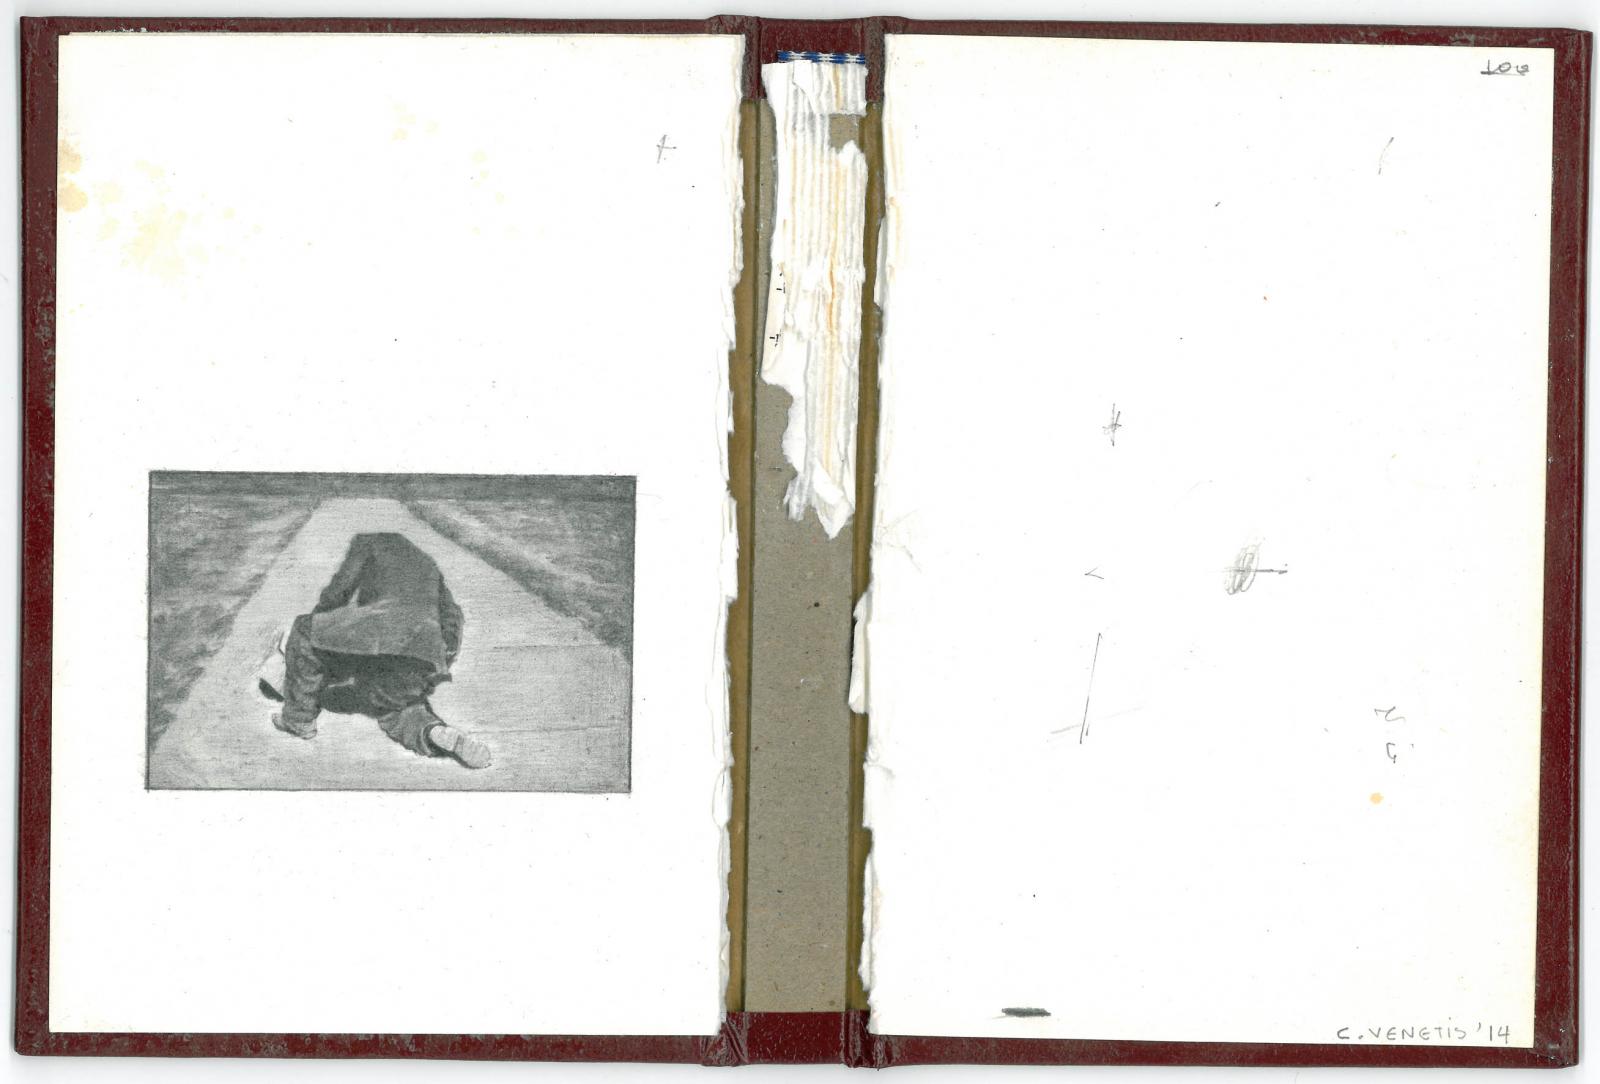 Christos Venetis, Anemic Archives Series, pencil on used book covers, 21,5 x 30 cm, 2013-15